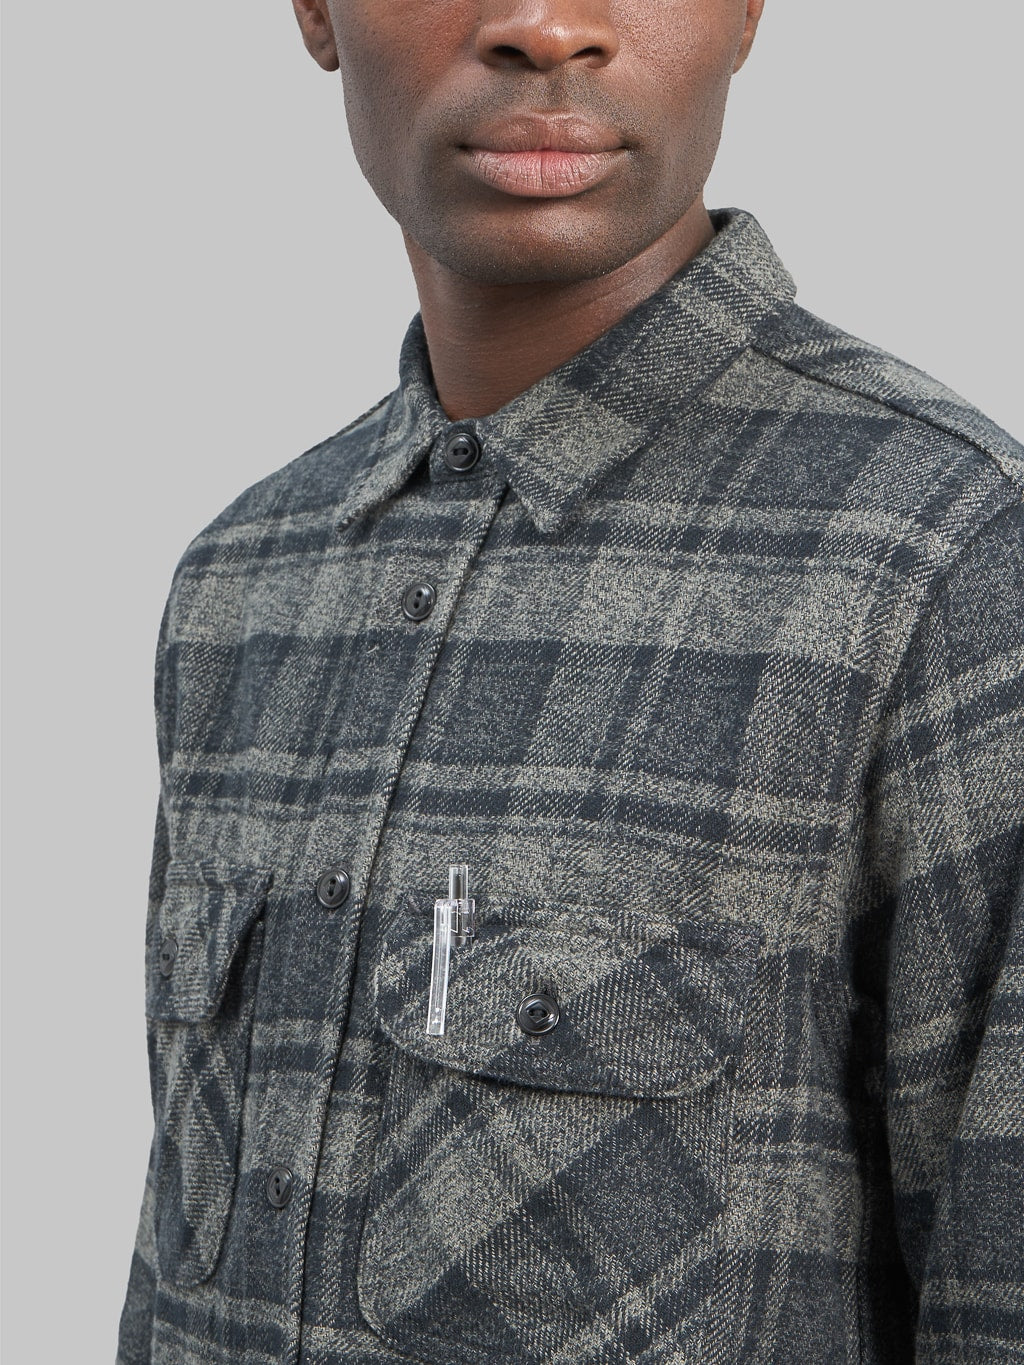 Fob Factory F3497 Nel Check Work flannel Shirt grey chest